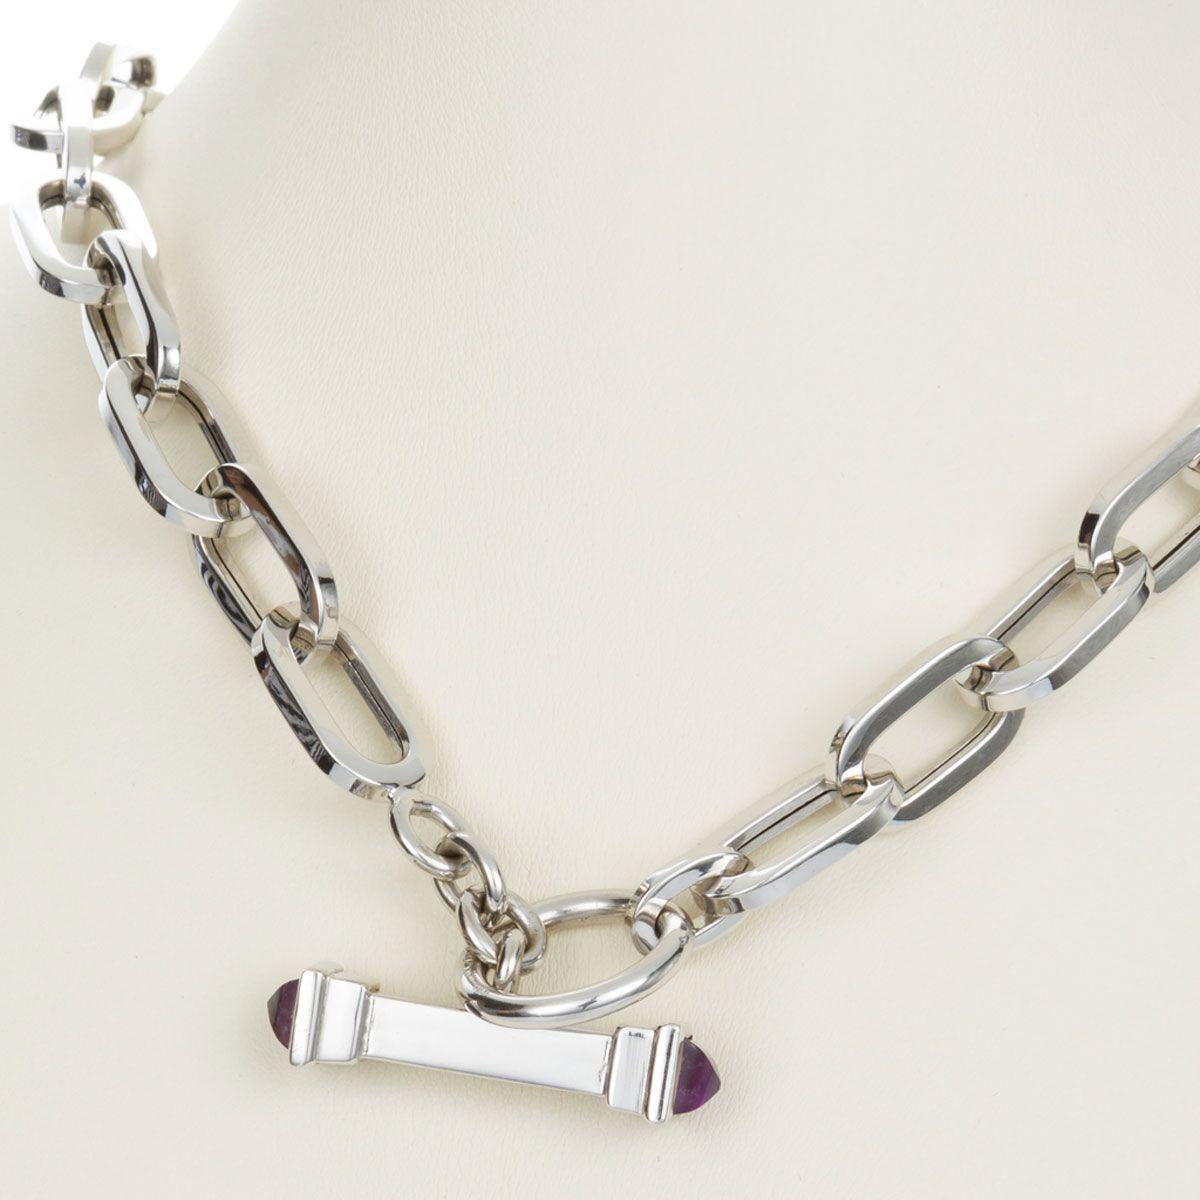 Fashionable and always in style, this 18k white gold chain link necklace is so chic. It's not often you see necklaces in white gold especially 18k. This one has a great link design - elongated oval links with a squared off edge. It sits perfectly on